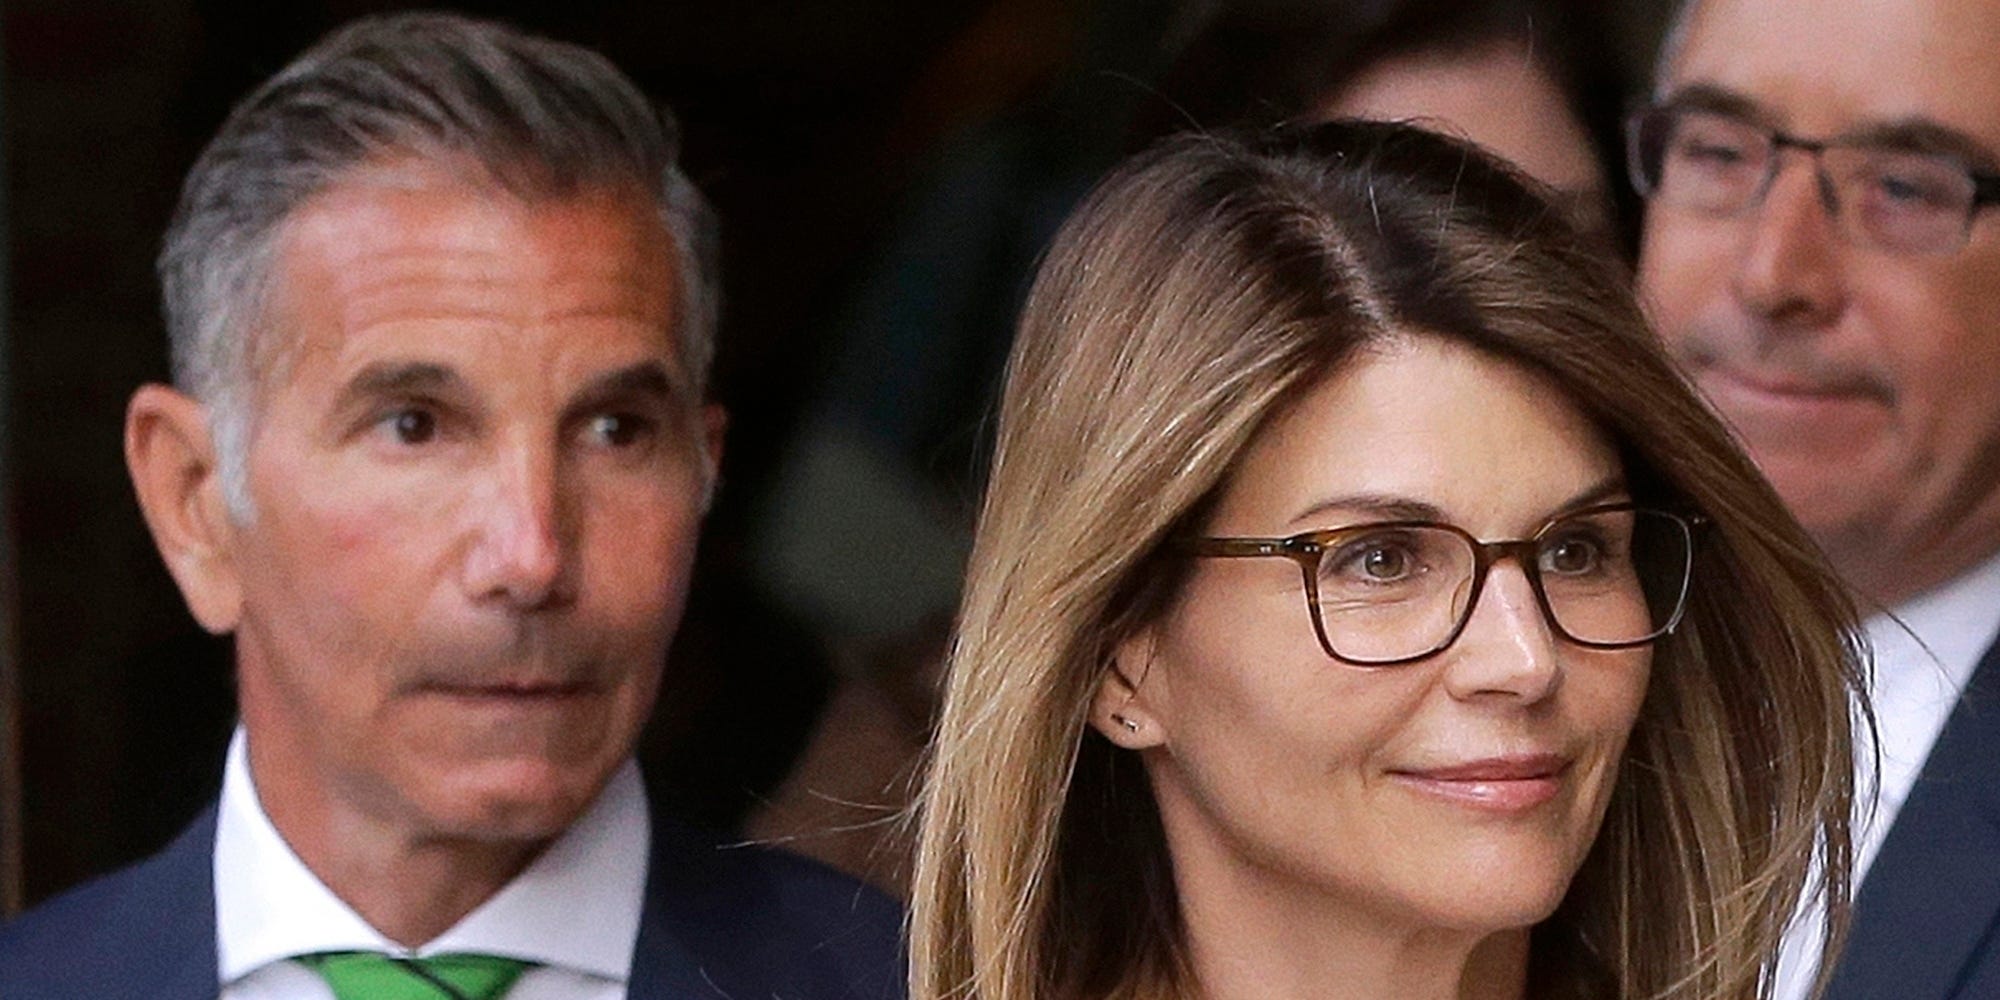 FILE - In this April 3, 2019, file photo, actress Lori Loughlin, front, and her husband, clothing designer Mossimo Giannulli, left, depart federal court in Boston after a hearing in a nationwide college admissions bribery scandal. A federal judge on Friday, May 8, 2020, refused to dismiss charges against the couple and other prominent parents accused of cheating in the college admissions process, siding with prosecutors who denied that investigators had fabricated evidence. (AP Photo/Steven Senne, File)